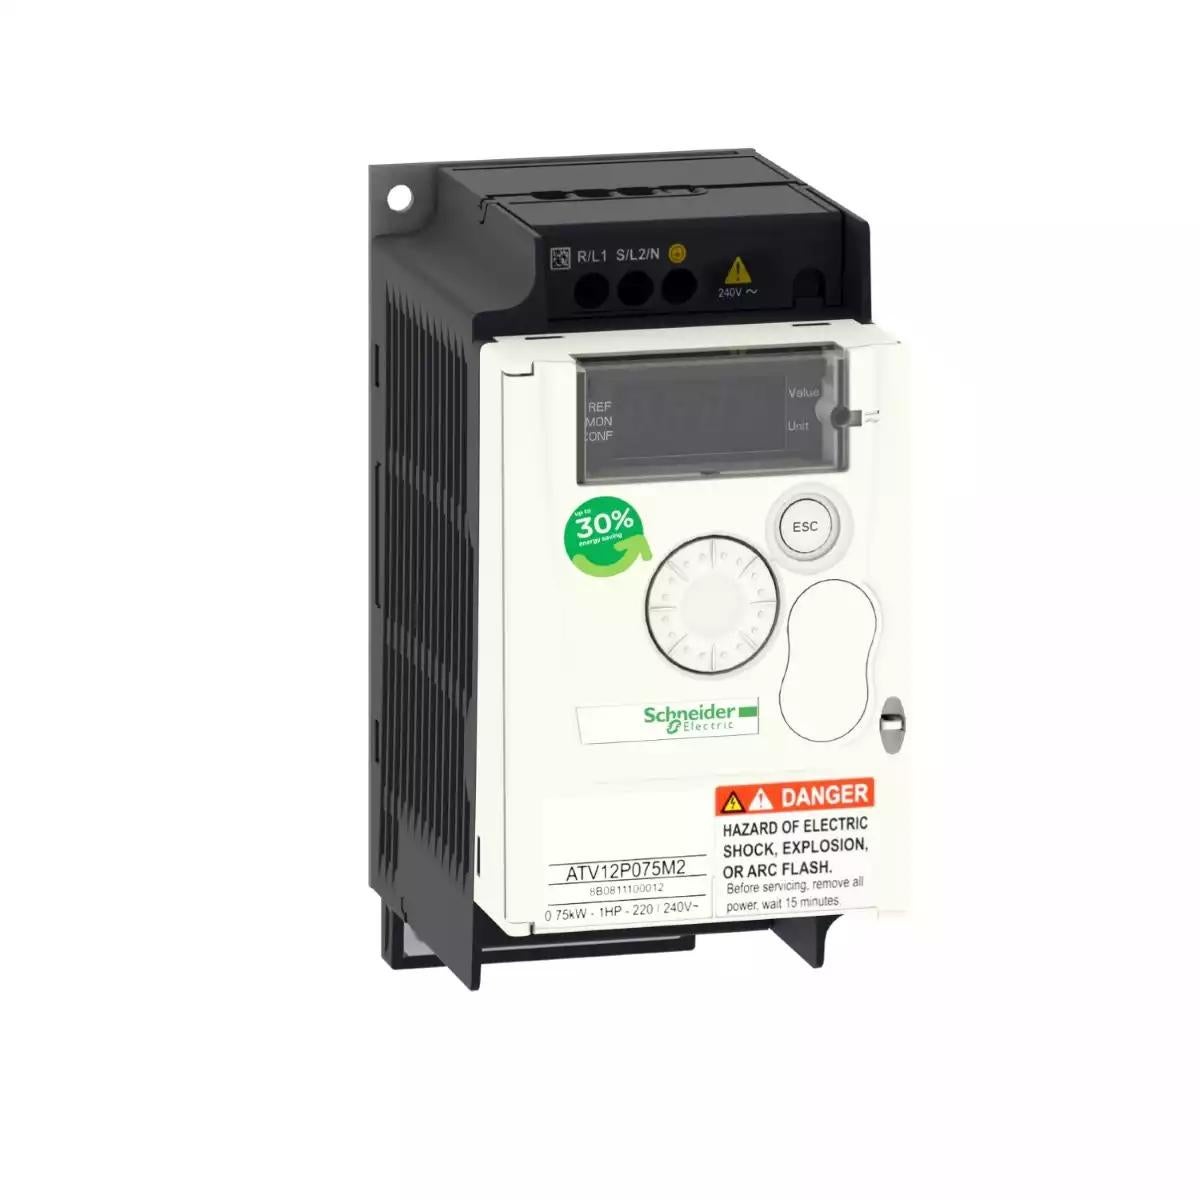 variable speed drive, Altivar 12, 0.75kW, 1hp, 200 to 240V, 1 phase, on base plate